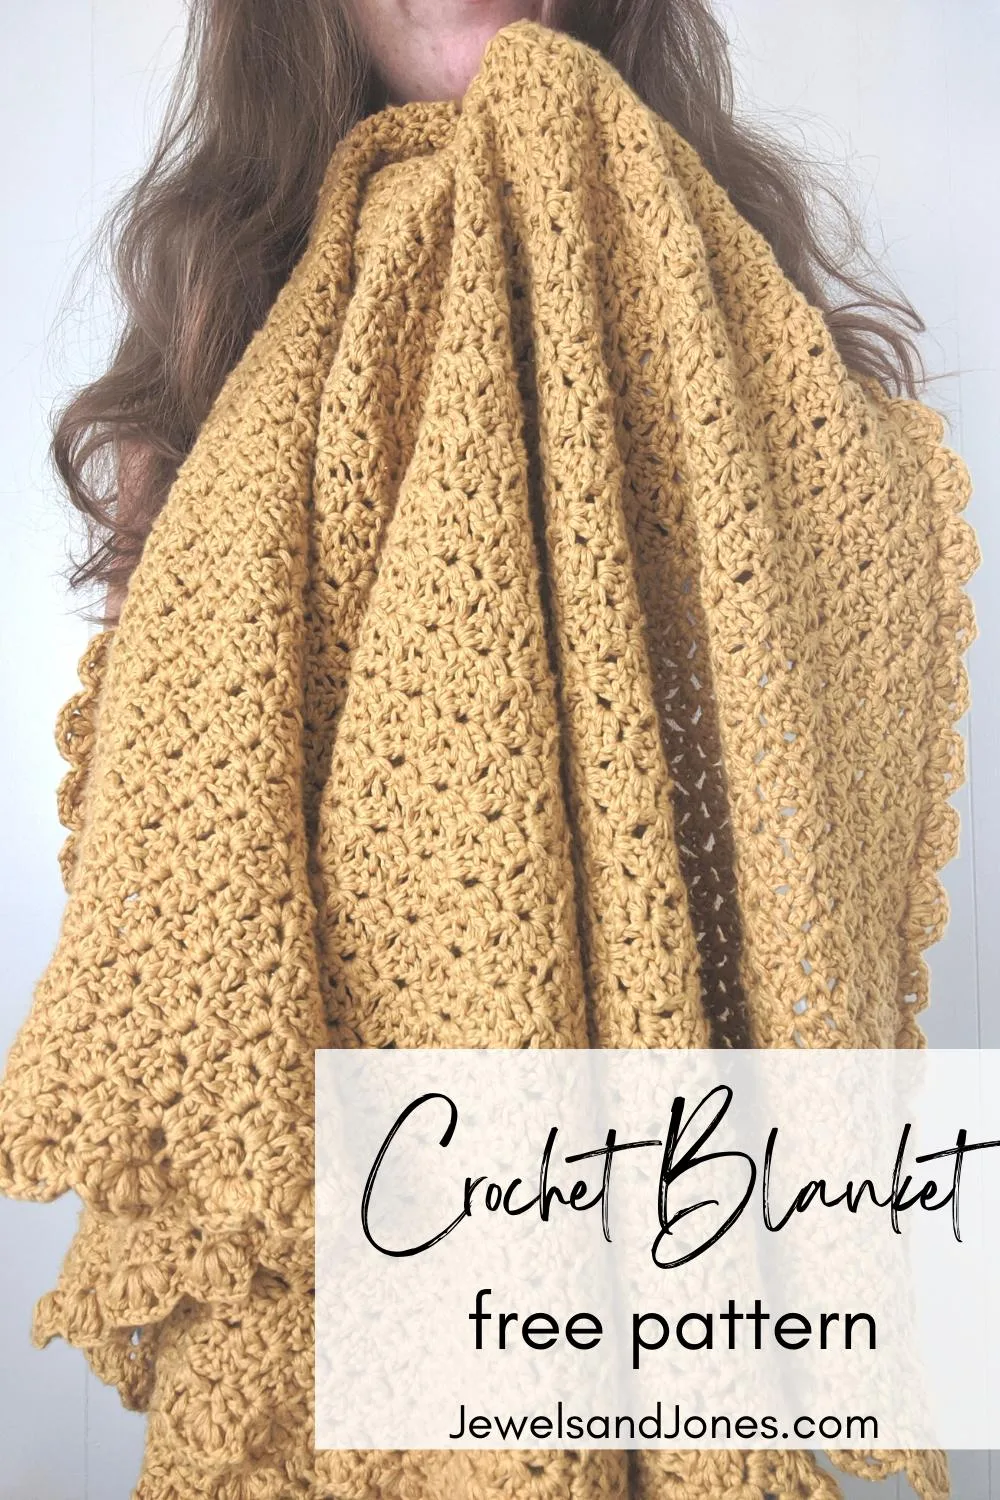 free crochet blanket pattern using a one-row repeat